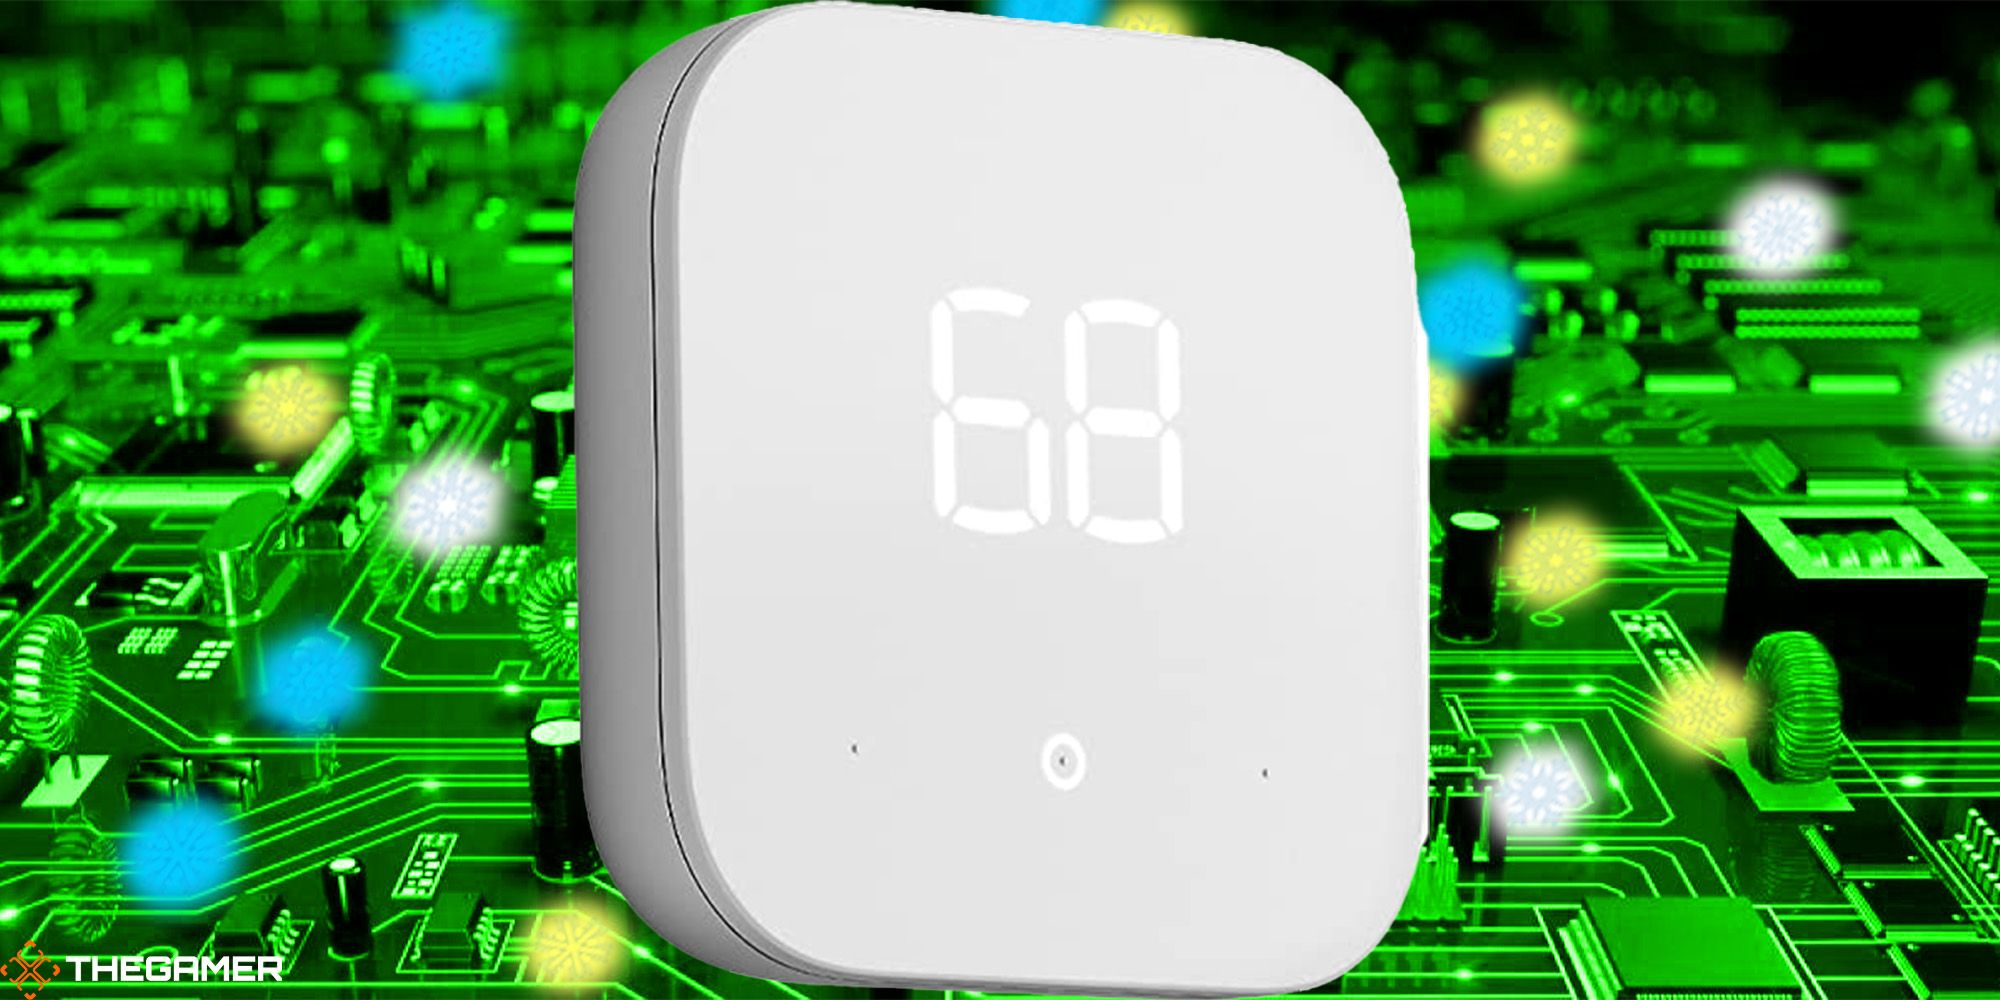 An Amazon Smart Thermostat against a snowy, green tech background. Custom image for TG.